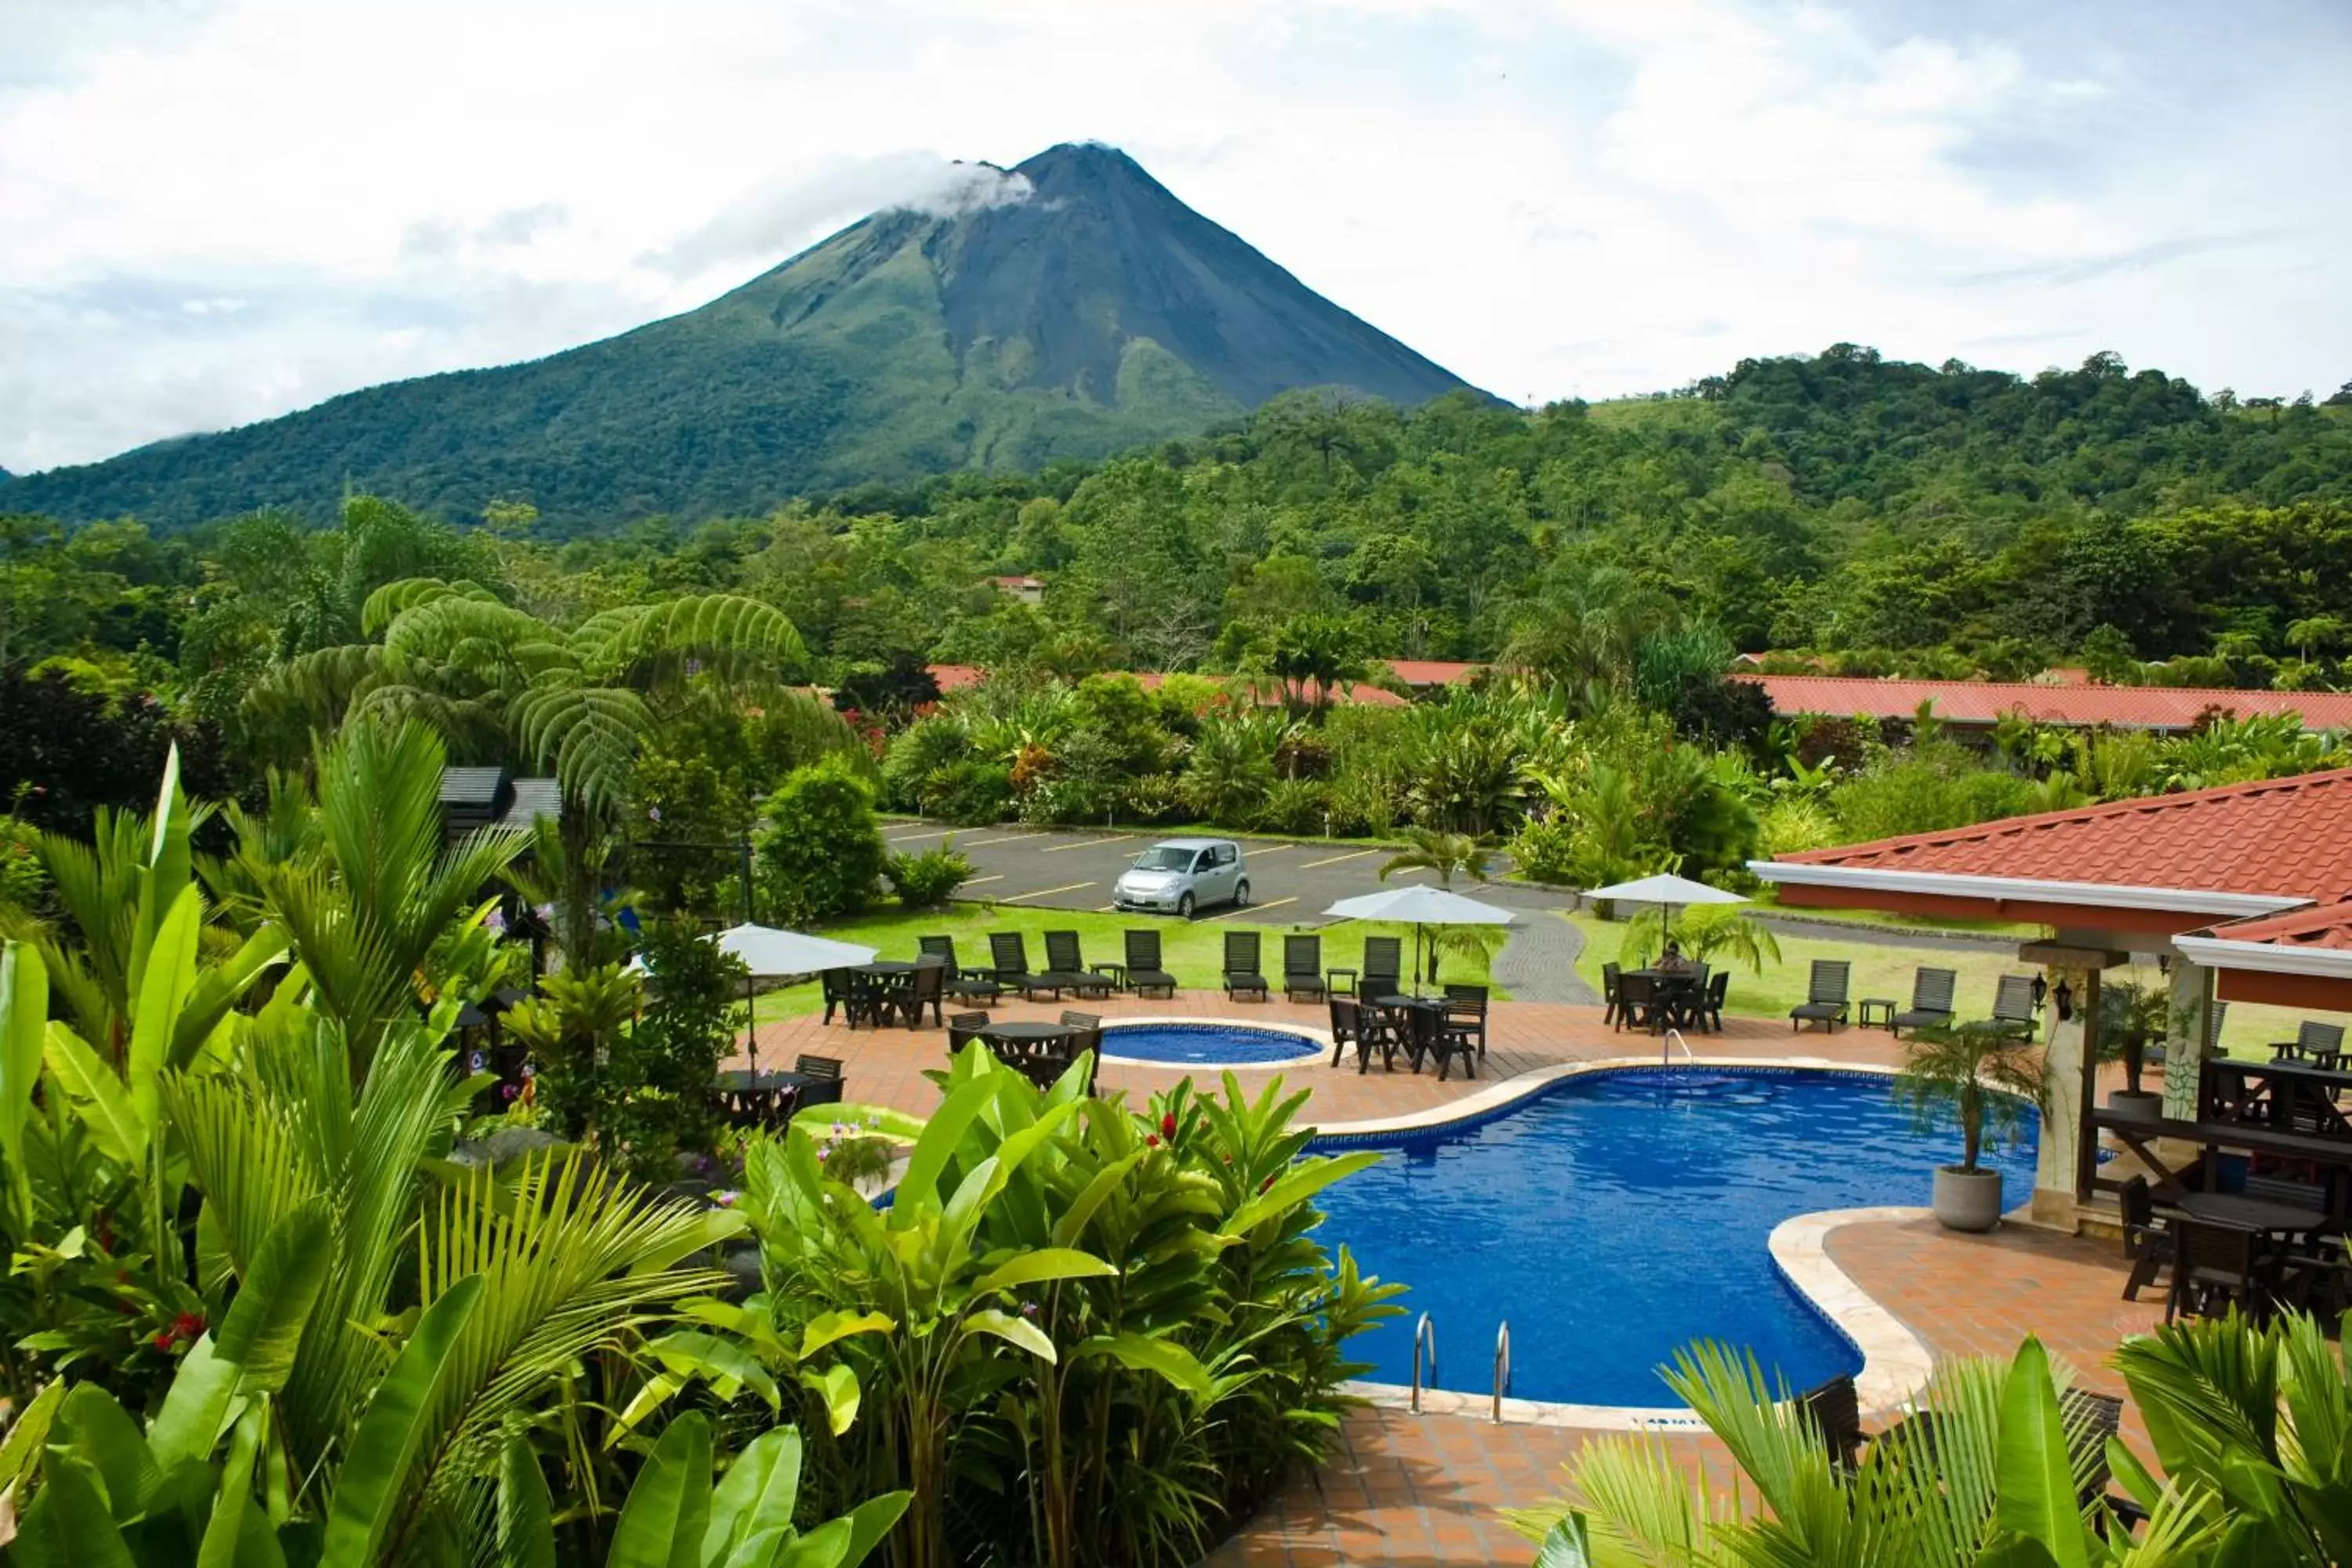 Day, Pool View in Volcano Lodge, Hotel & Thermal Experience